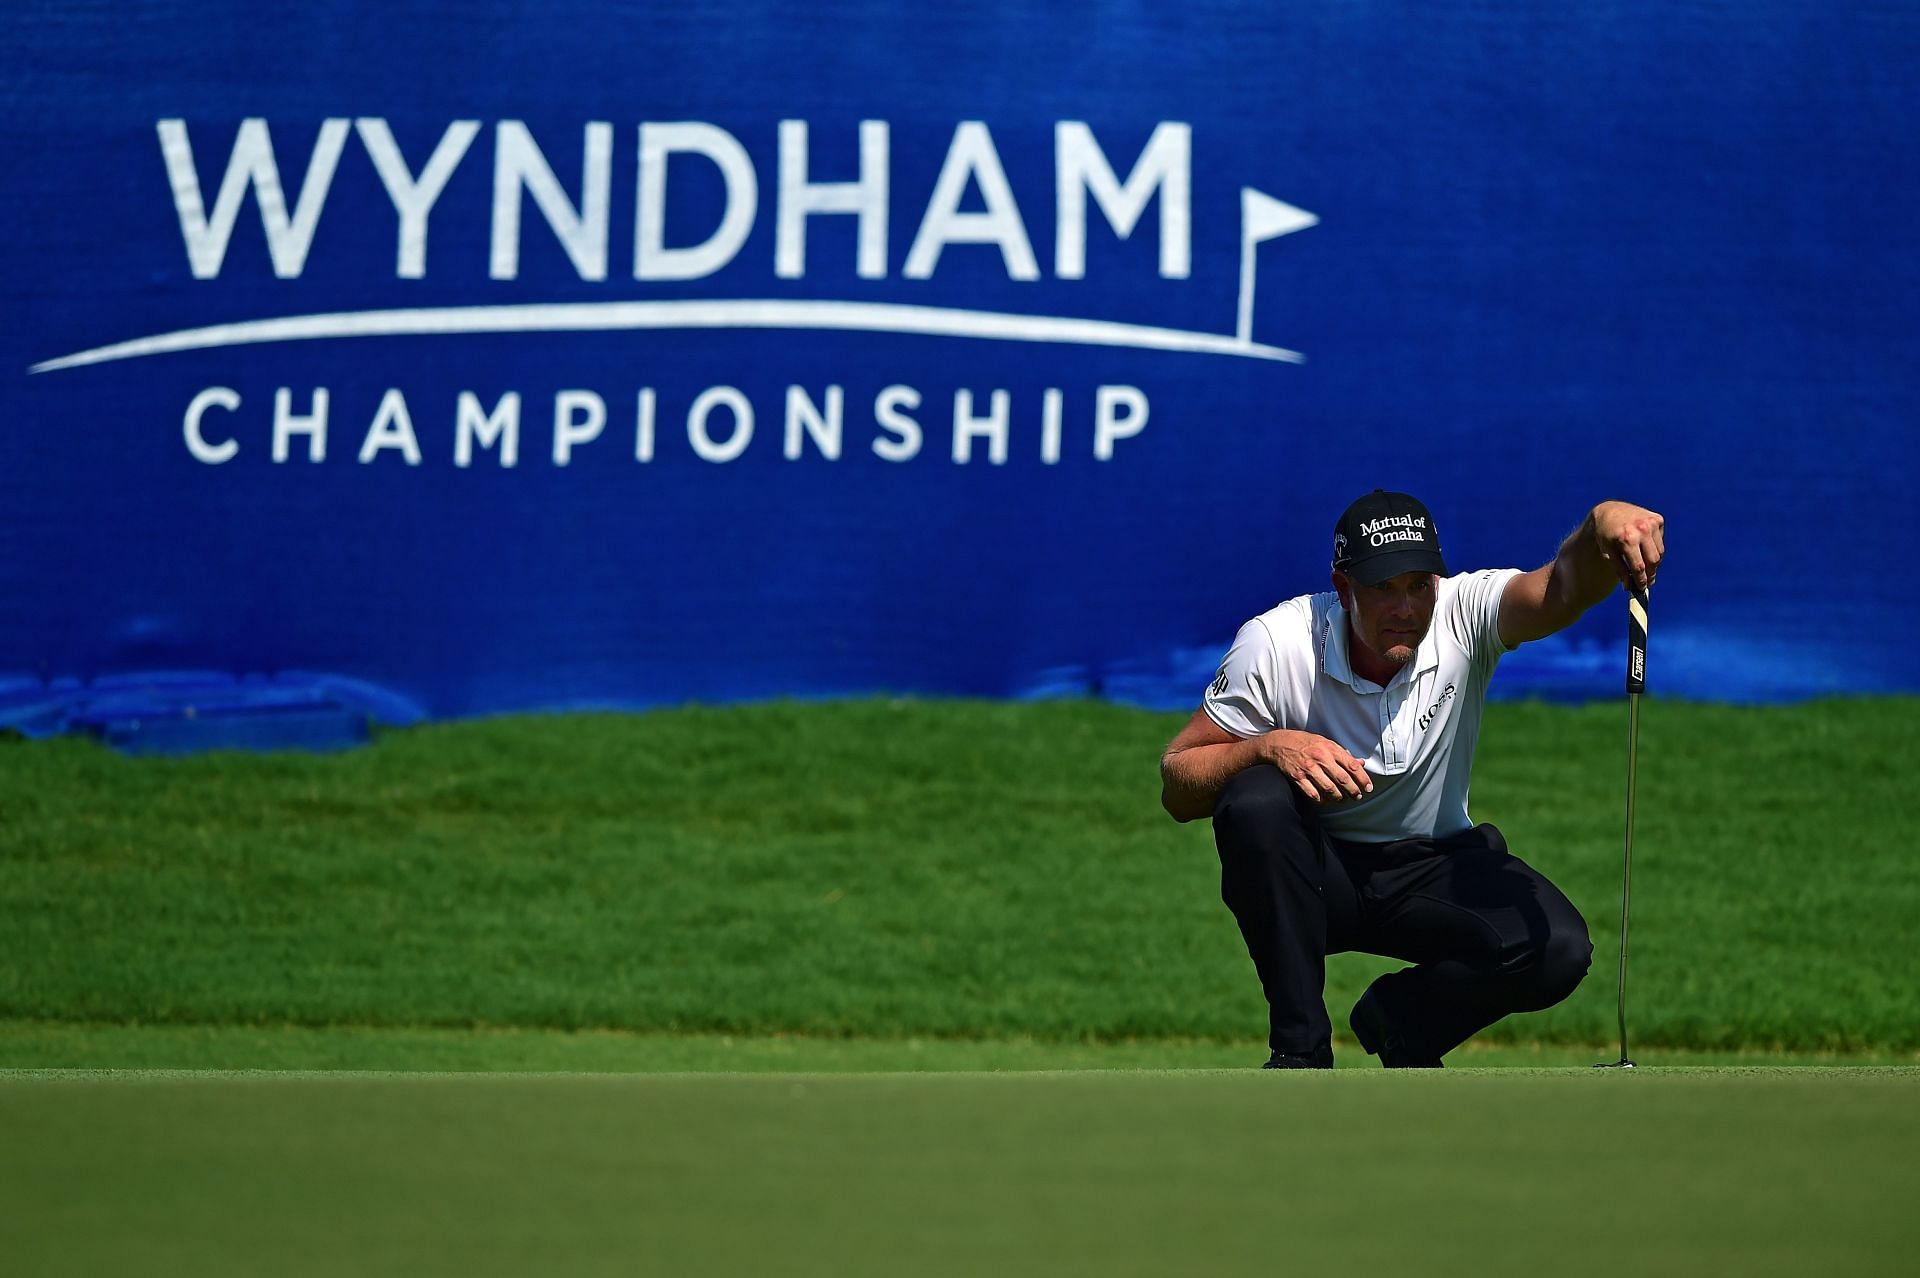 How to watch the Wyndham Championship 2023, TV schedule, streaming, radio, and more